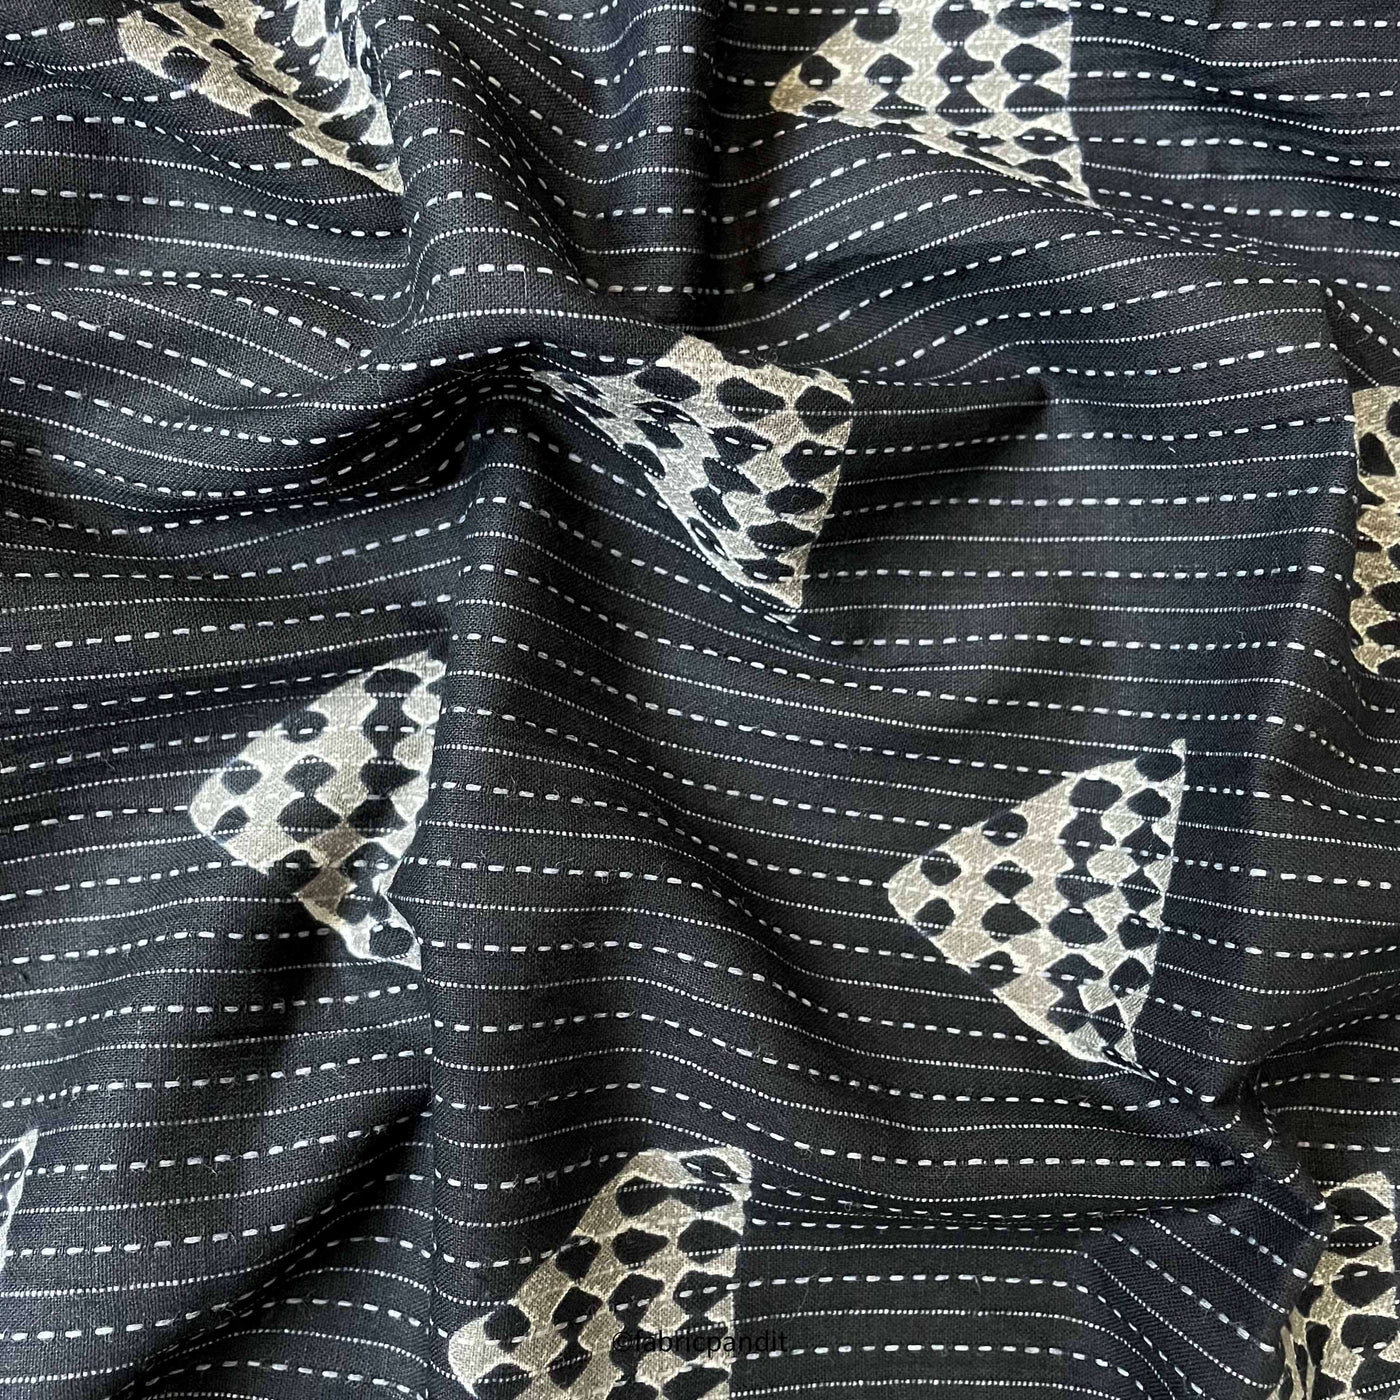 Hand Block Printed Cotton Fabric Cut Piece (CUT PIECE) Black & Grey Abstract Triangles Woven Kantha Hand Block Printed Pure Cotton Fabric (Width 42 inches)